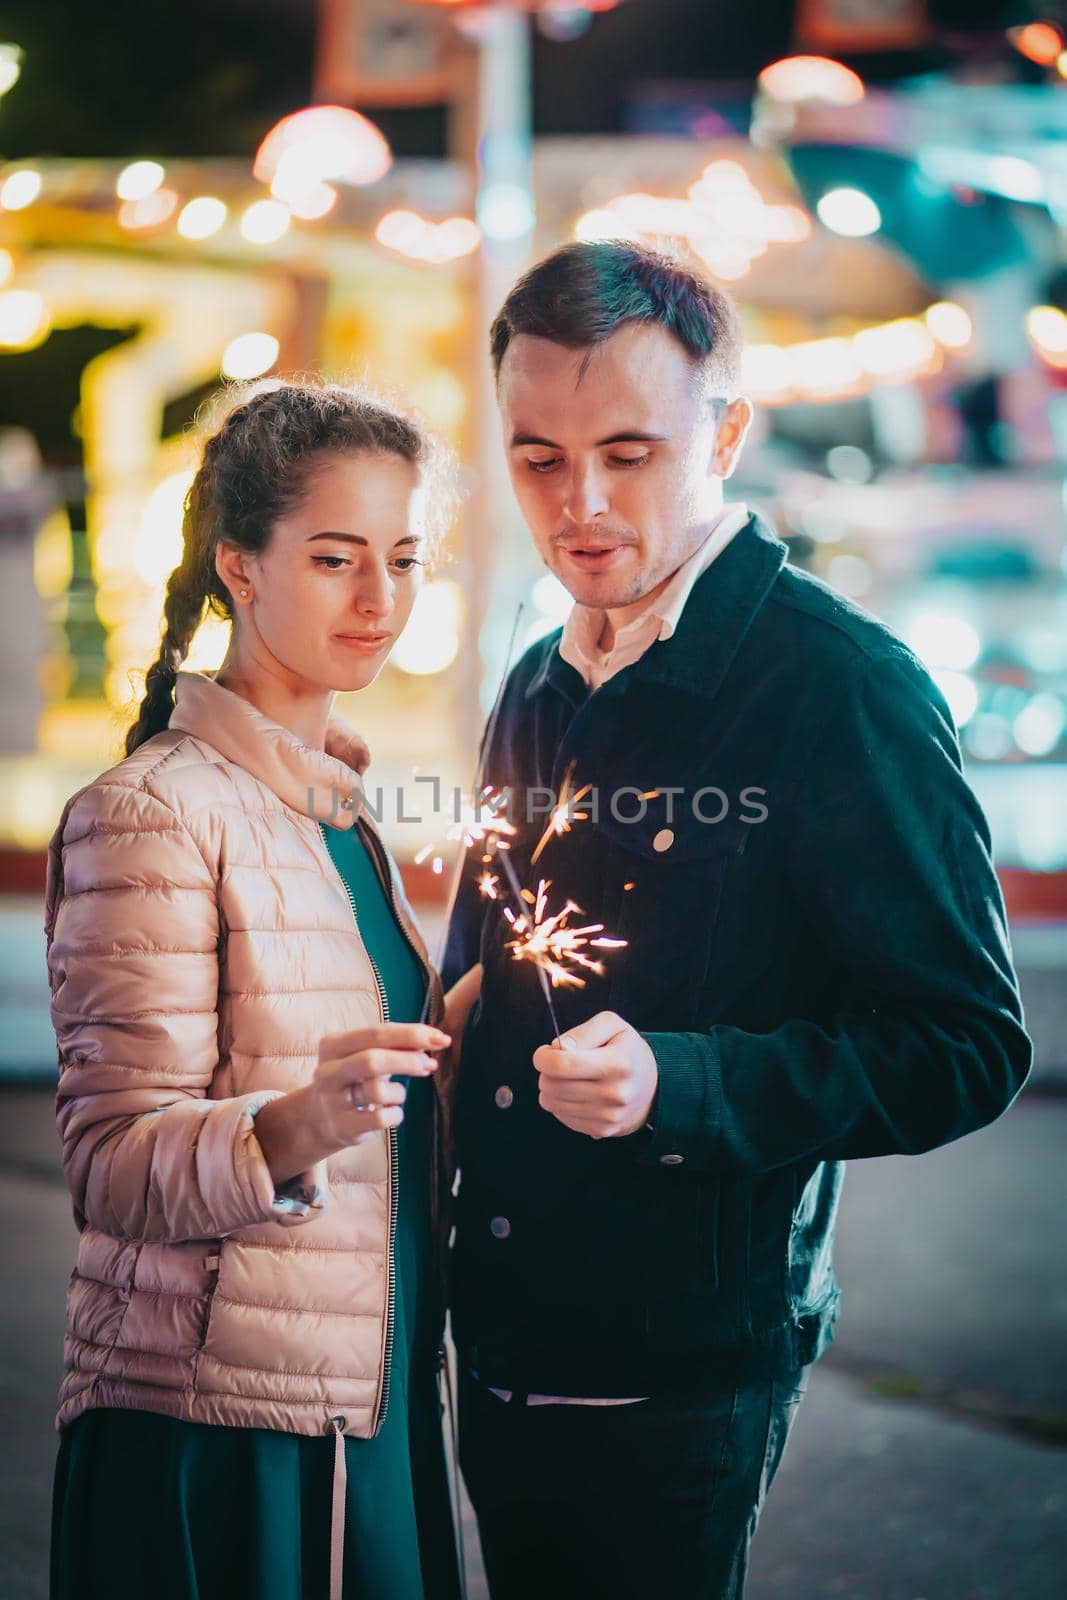 Millennial couple with sparkling bengal fire spending time together on date in amusement park at night. Lovers standing on Illuminated background. Celebration, anniversary. High quality photo